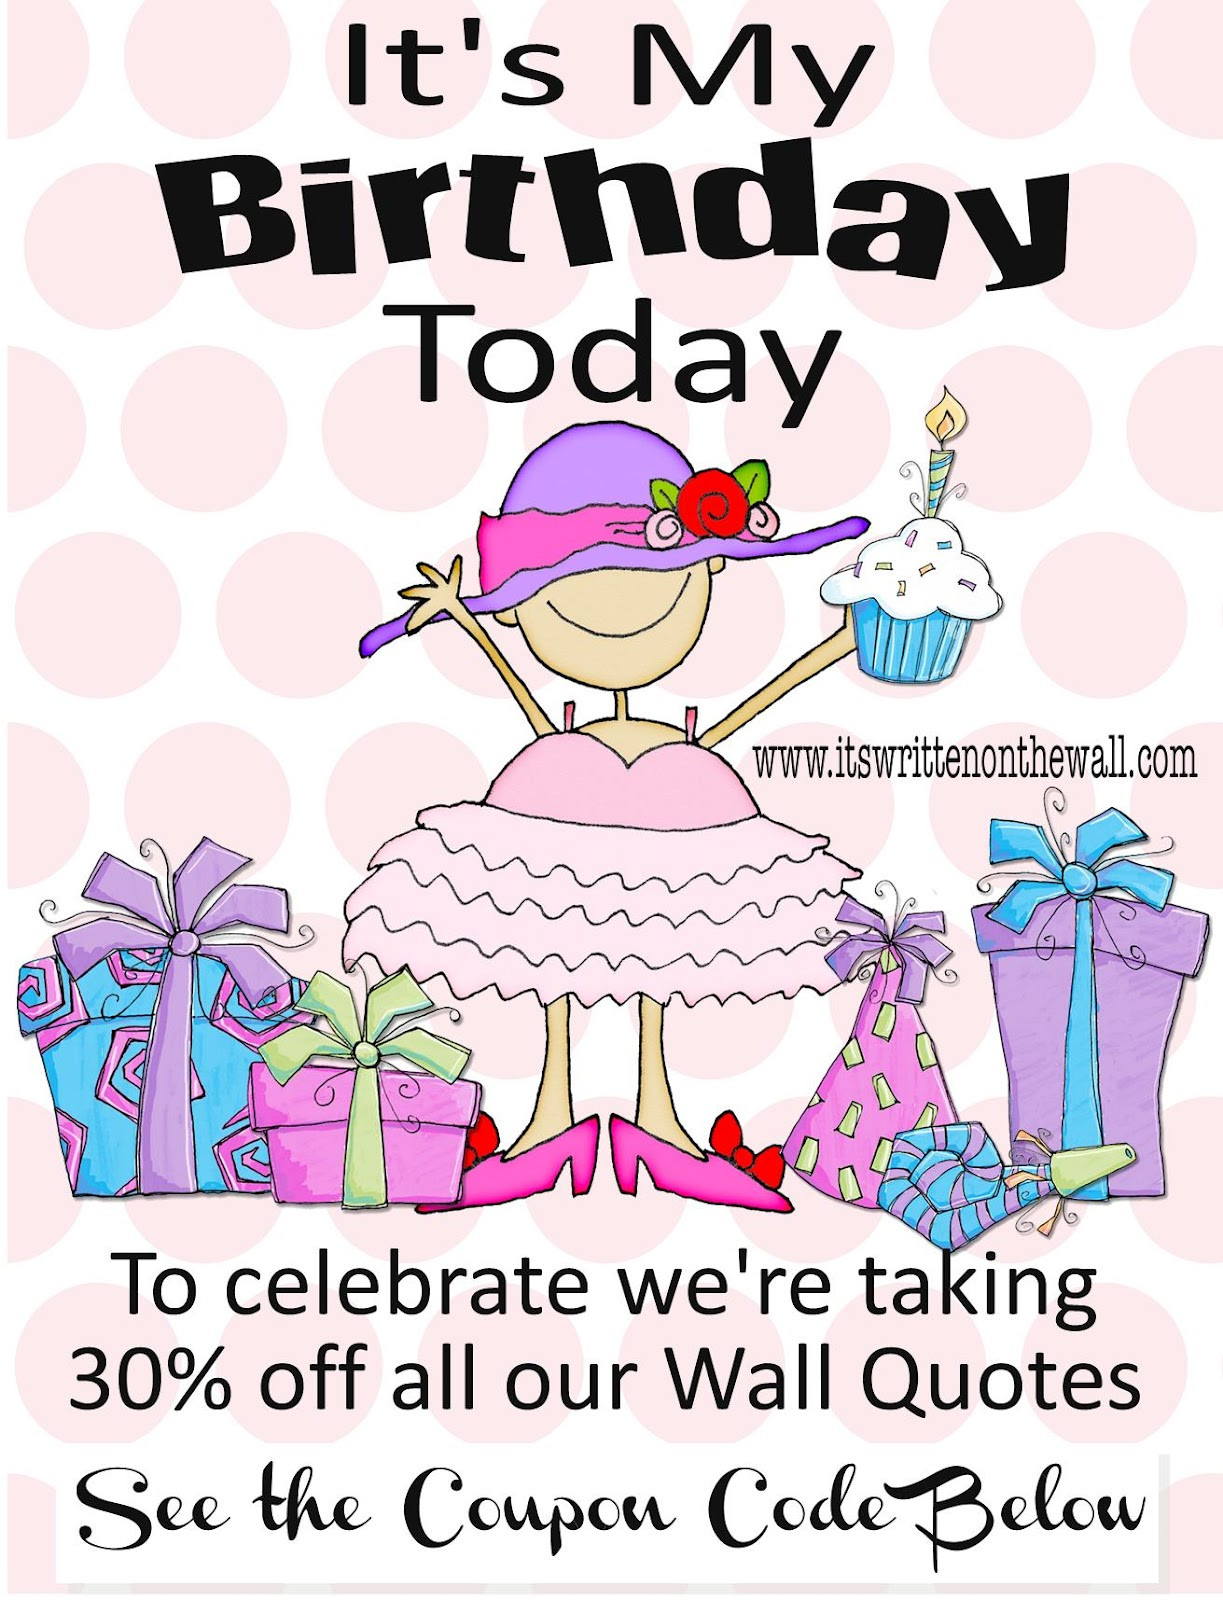 Celebrate Birthday Quotes
 ihot wallons It s My Birthday Today Let s Celebrate with